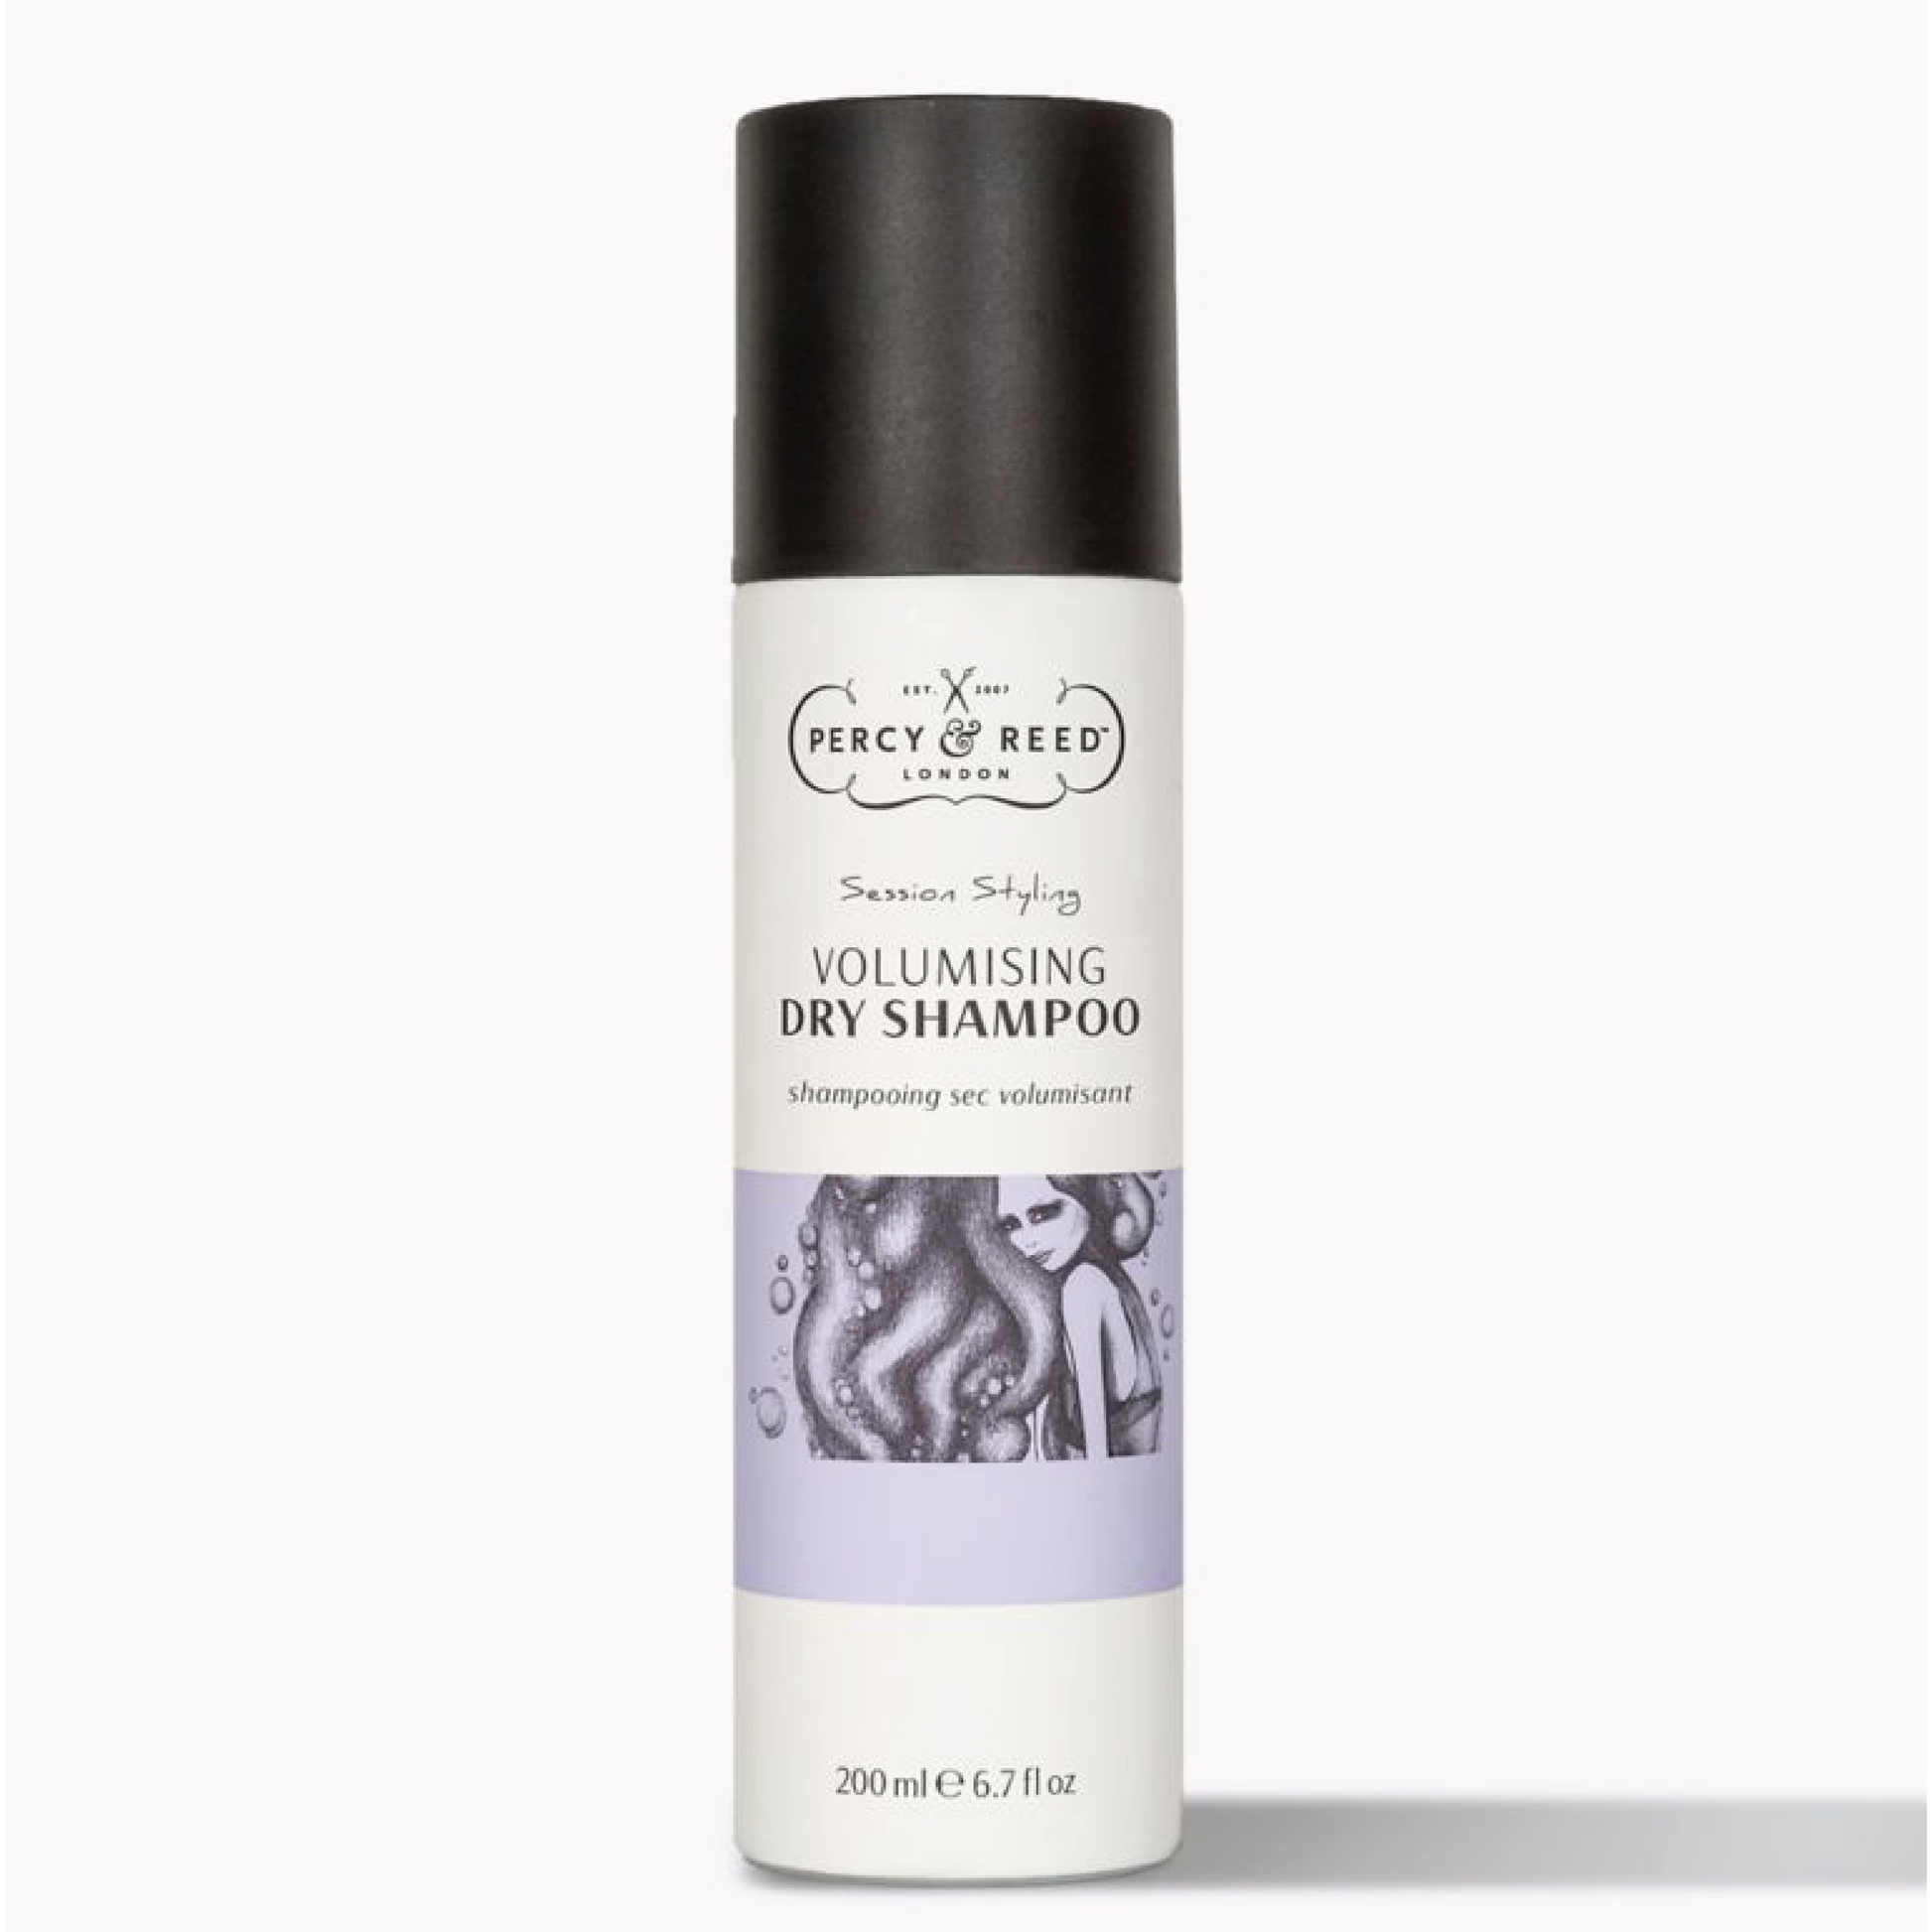 Percy & Reed Session Styling Volumising Dry Shampoo, 200ml The Good Vibes